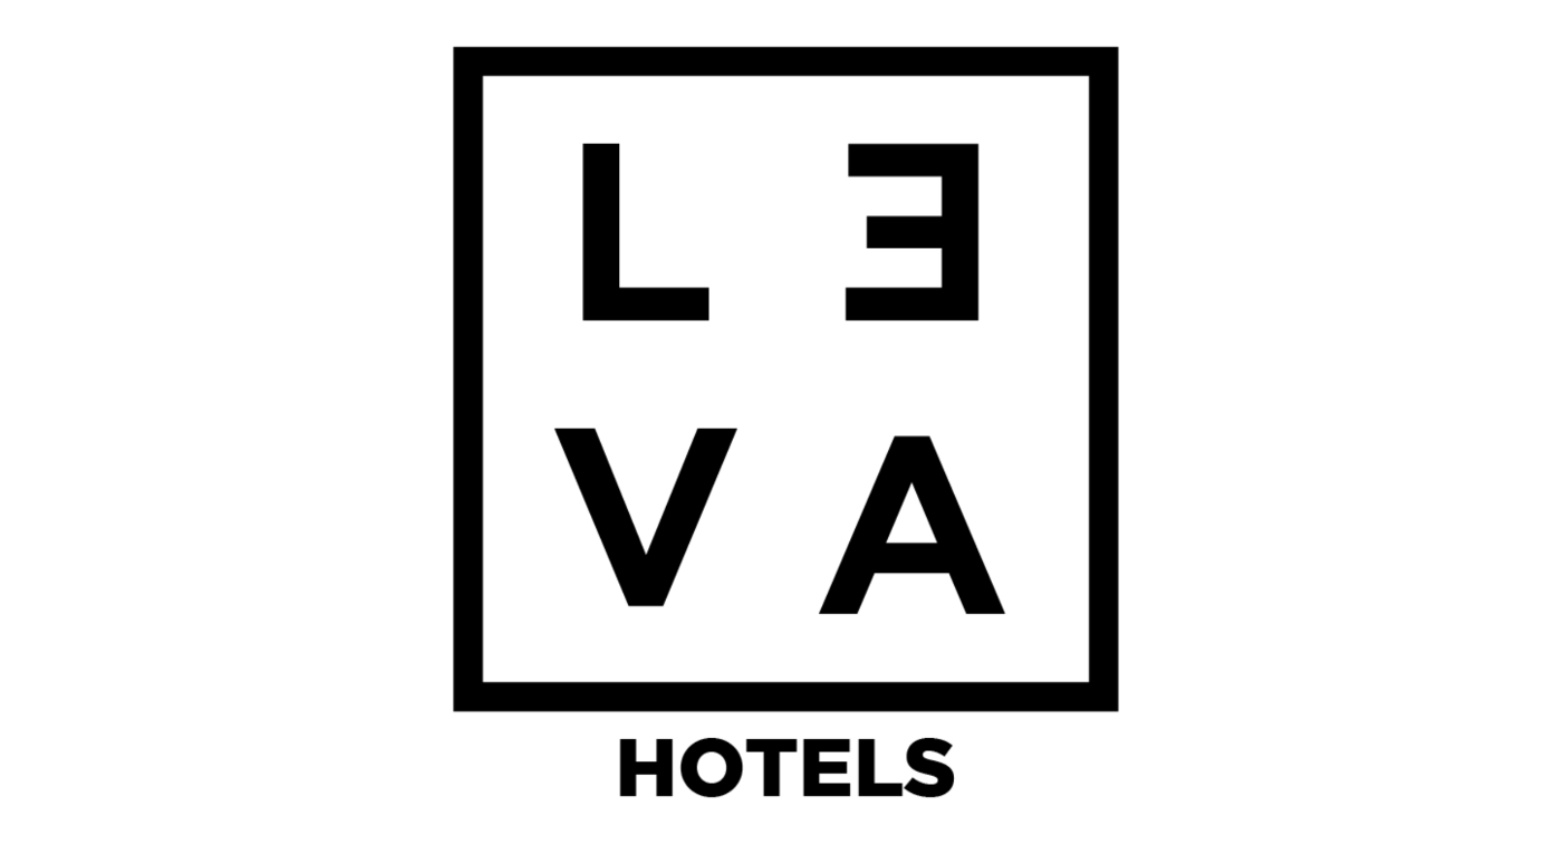 Lagos, Nigeria hotel expansion: LEVA’s Fifth Property in africa